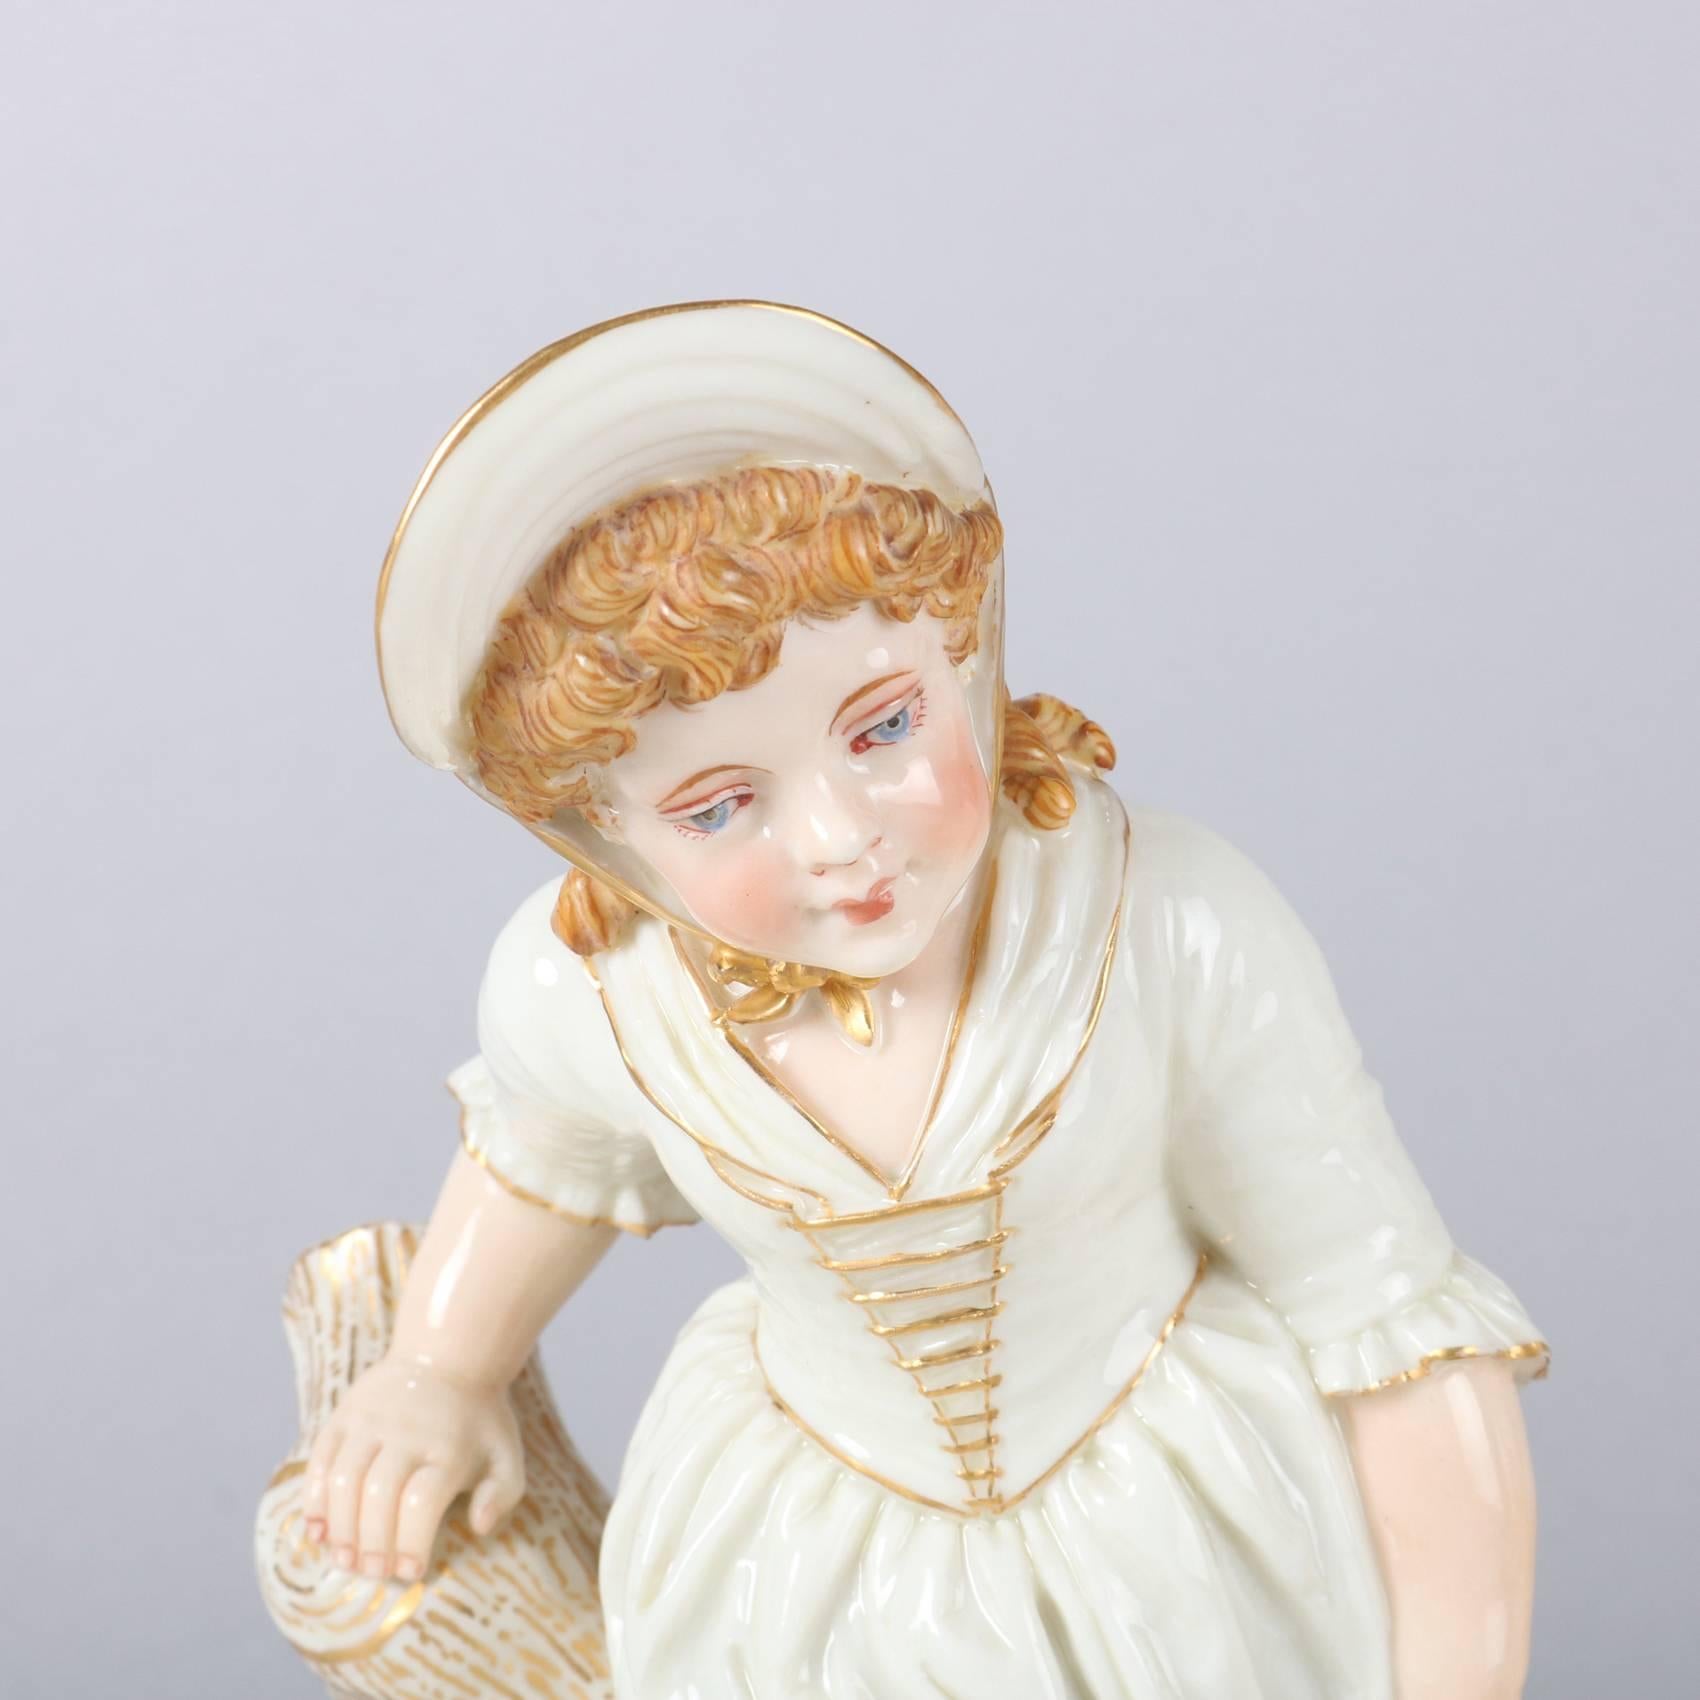 Pair of antique English figural Royal Worcester hand-painted and gilt candy or bon bon dishes by James Hadley feature young girl and boy, embossed "Hadley" incised on side of base, blue maker mark on underside, reminiscent of Royal